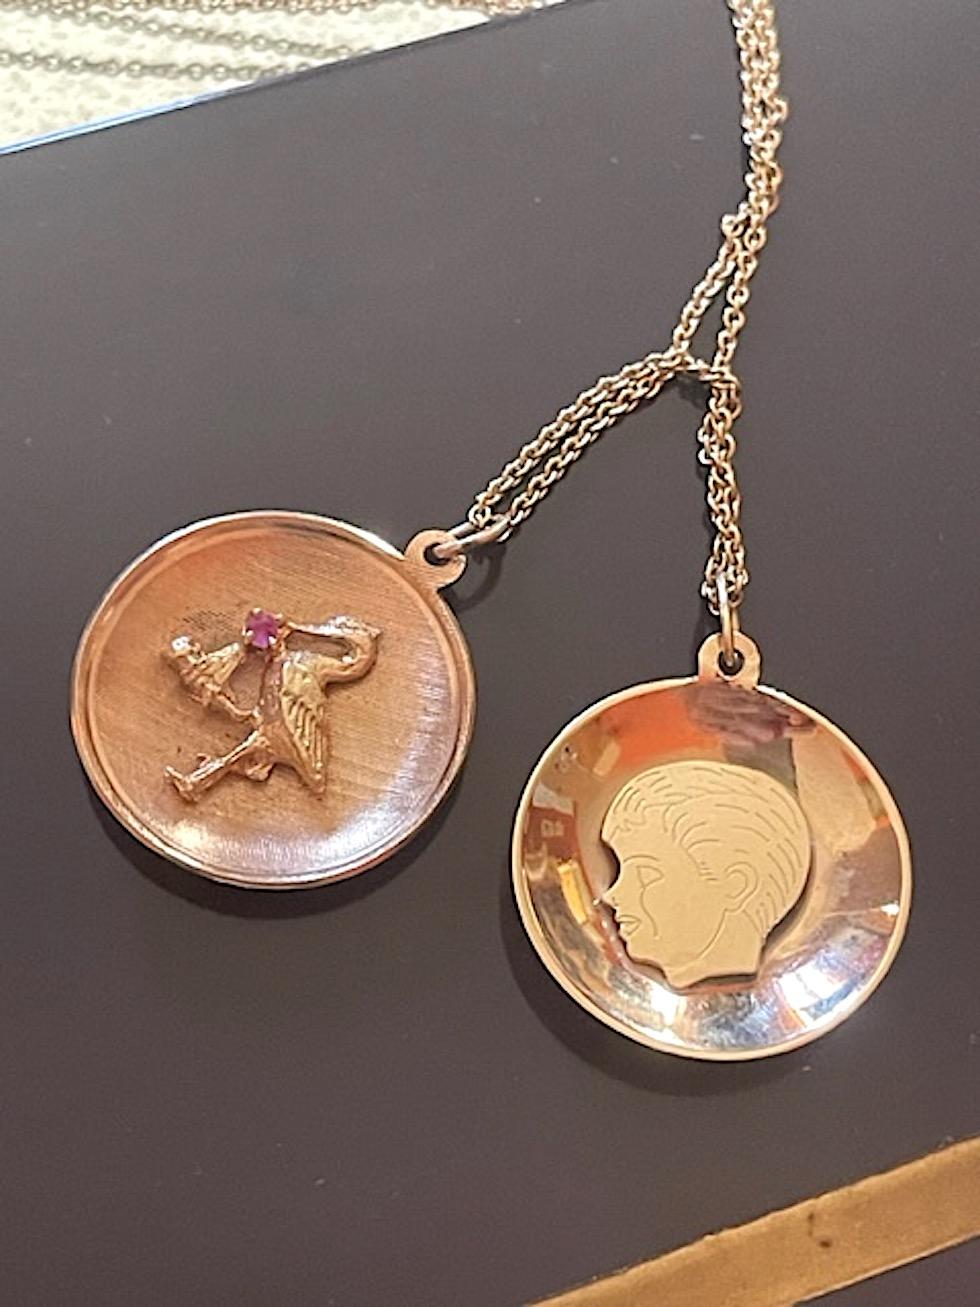 The perfect Mother's Day Gift for a mom of boys or an expectant boy mom. 

The engraved silhouette of a boy is set onto a concave disc medallion charm.

The back of the charm may be engraved with a name, message and/or birthdate. This is a retro and